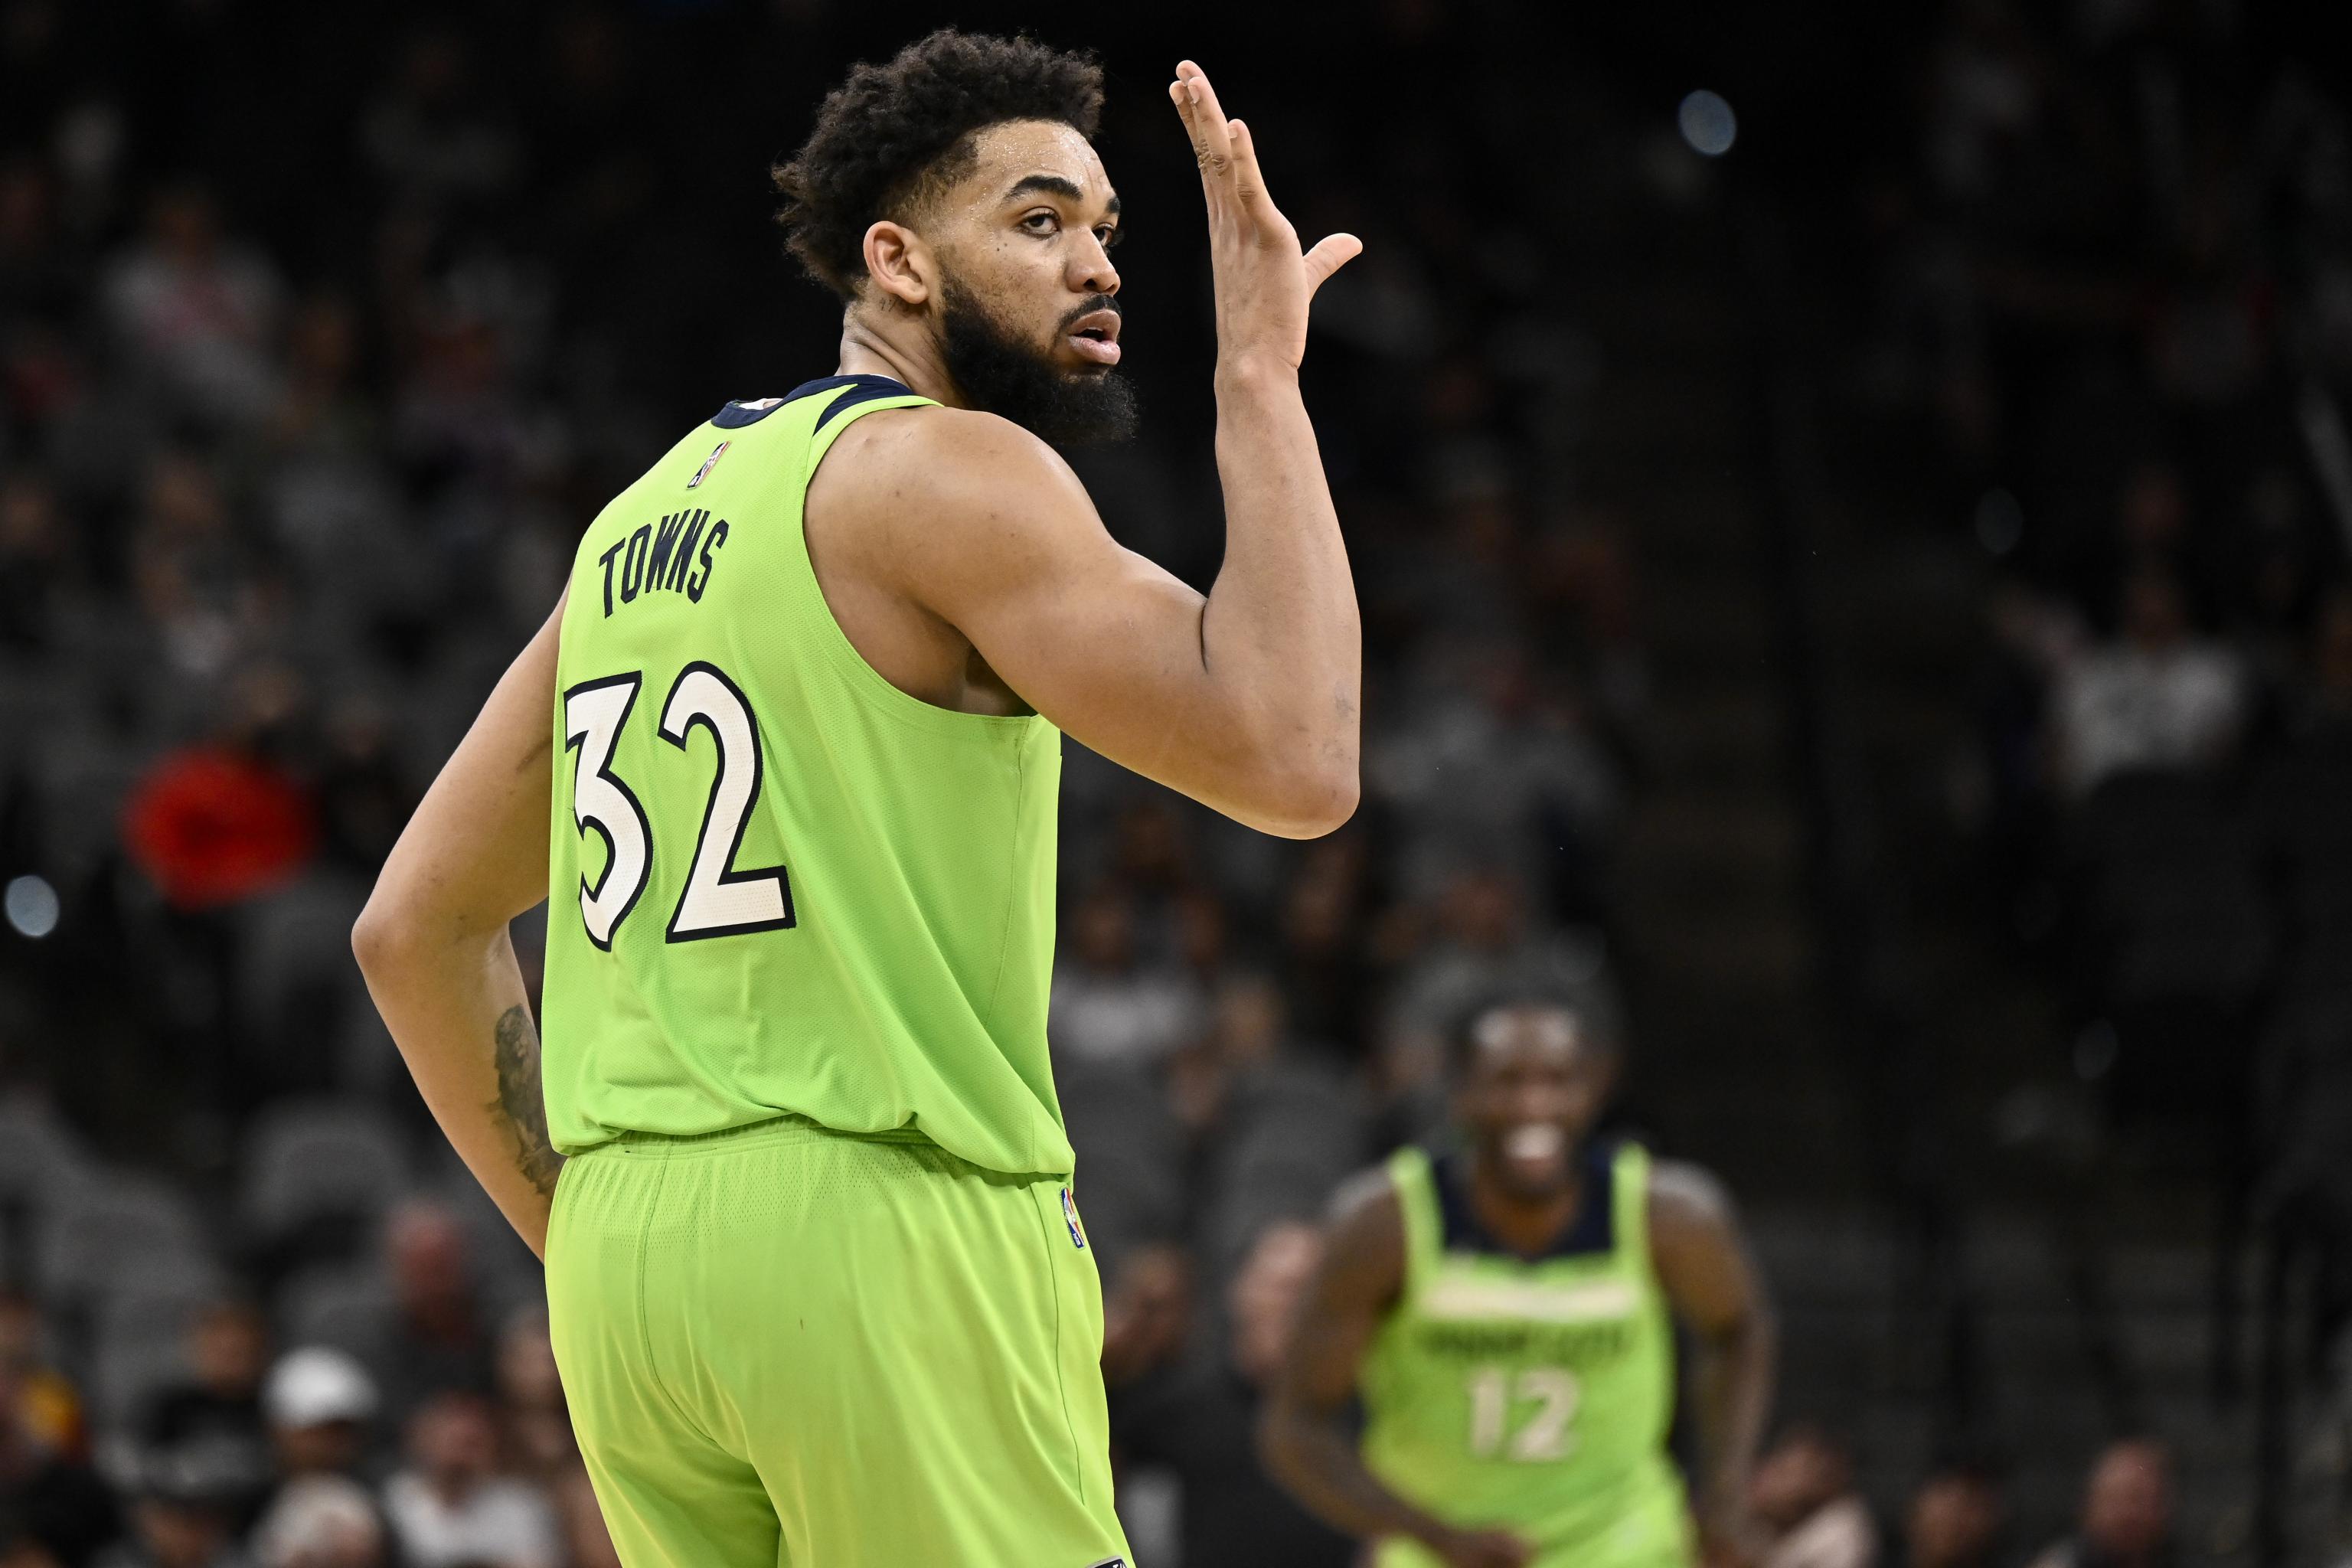 NBA Trade Rumors: Wolves Center Karl-Anthony Towns Linked to Trail